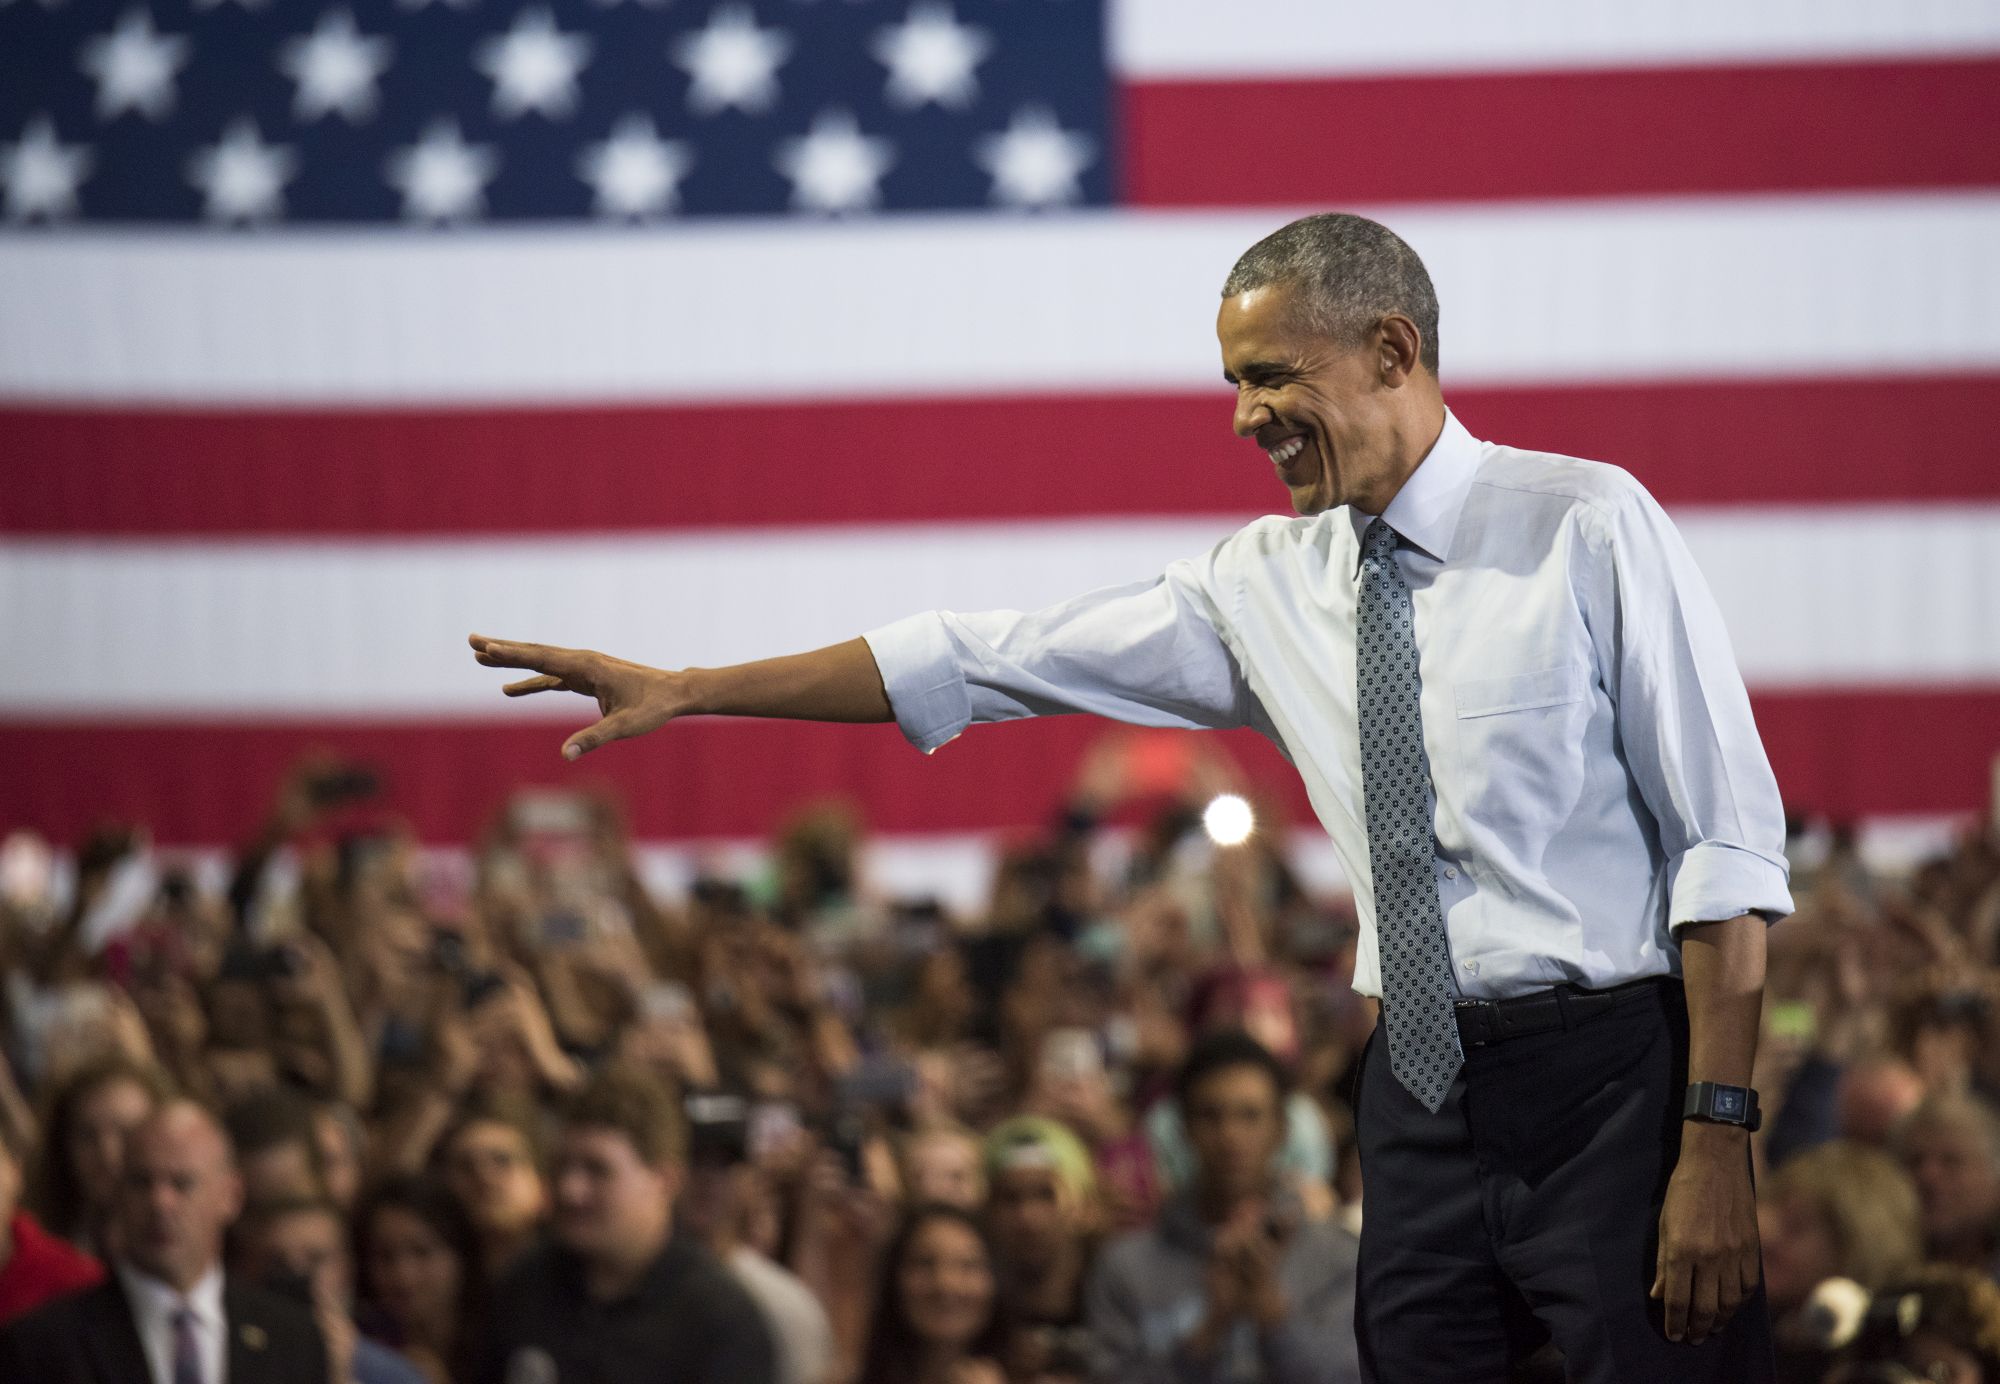 COLUMBUS, OH - NOVEMBER 01: President Barack Obama waves to the crowd before speaking during a campaign event for Hillary Clinton at Capital University on November 1, 2016 in Columbus, Ohio. President Obama was stressing to the crowd the importance to vote with the presidential race so close, between Clinton and Trump, only one week before election day. (Photo by Ty Wright/Getty Images)